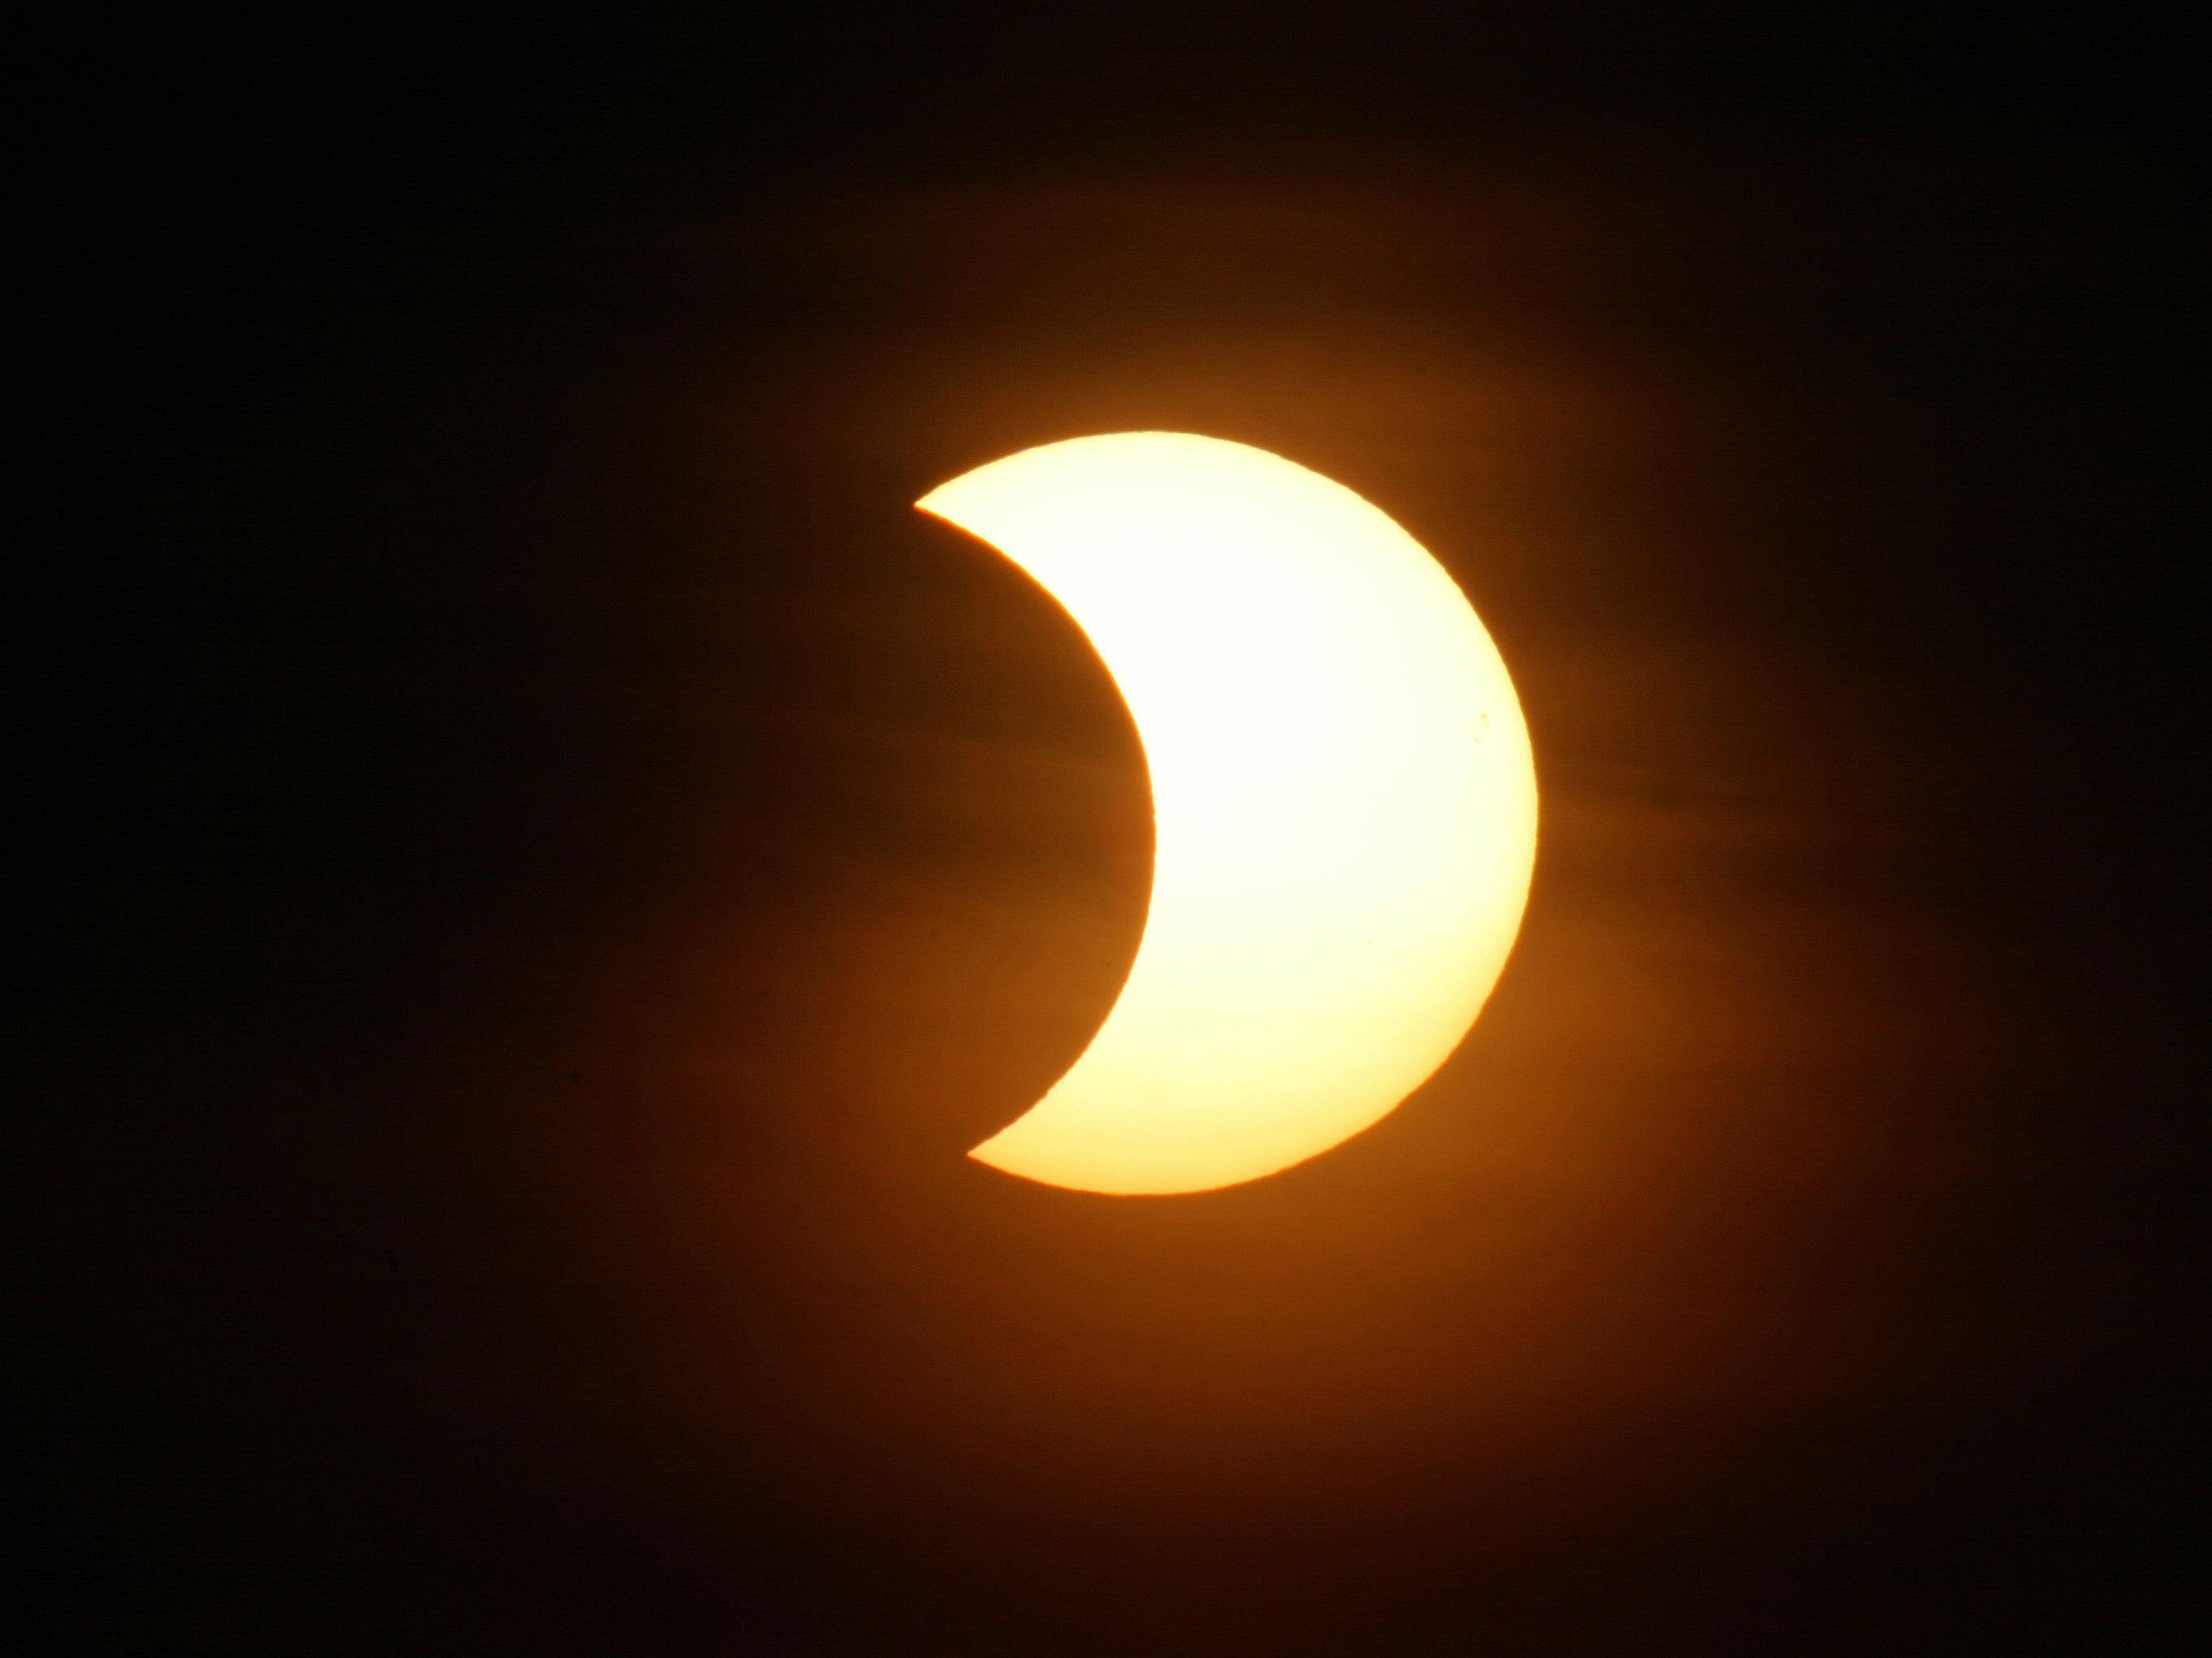 Sky gazers across South America will be hoping for clear skies to view the solar eclipse on 30 April, 2022